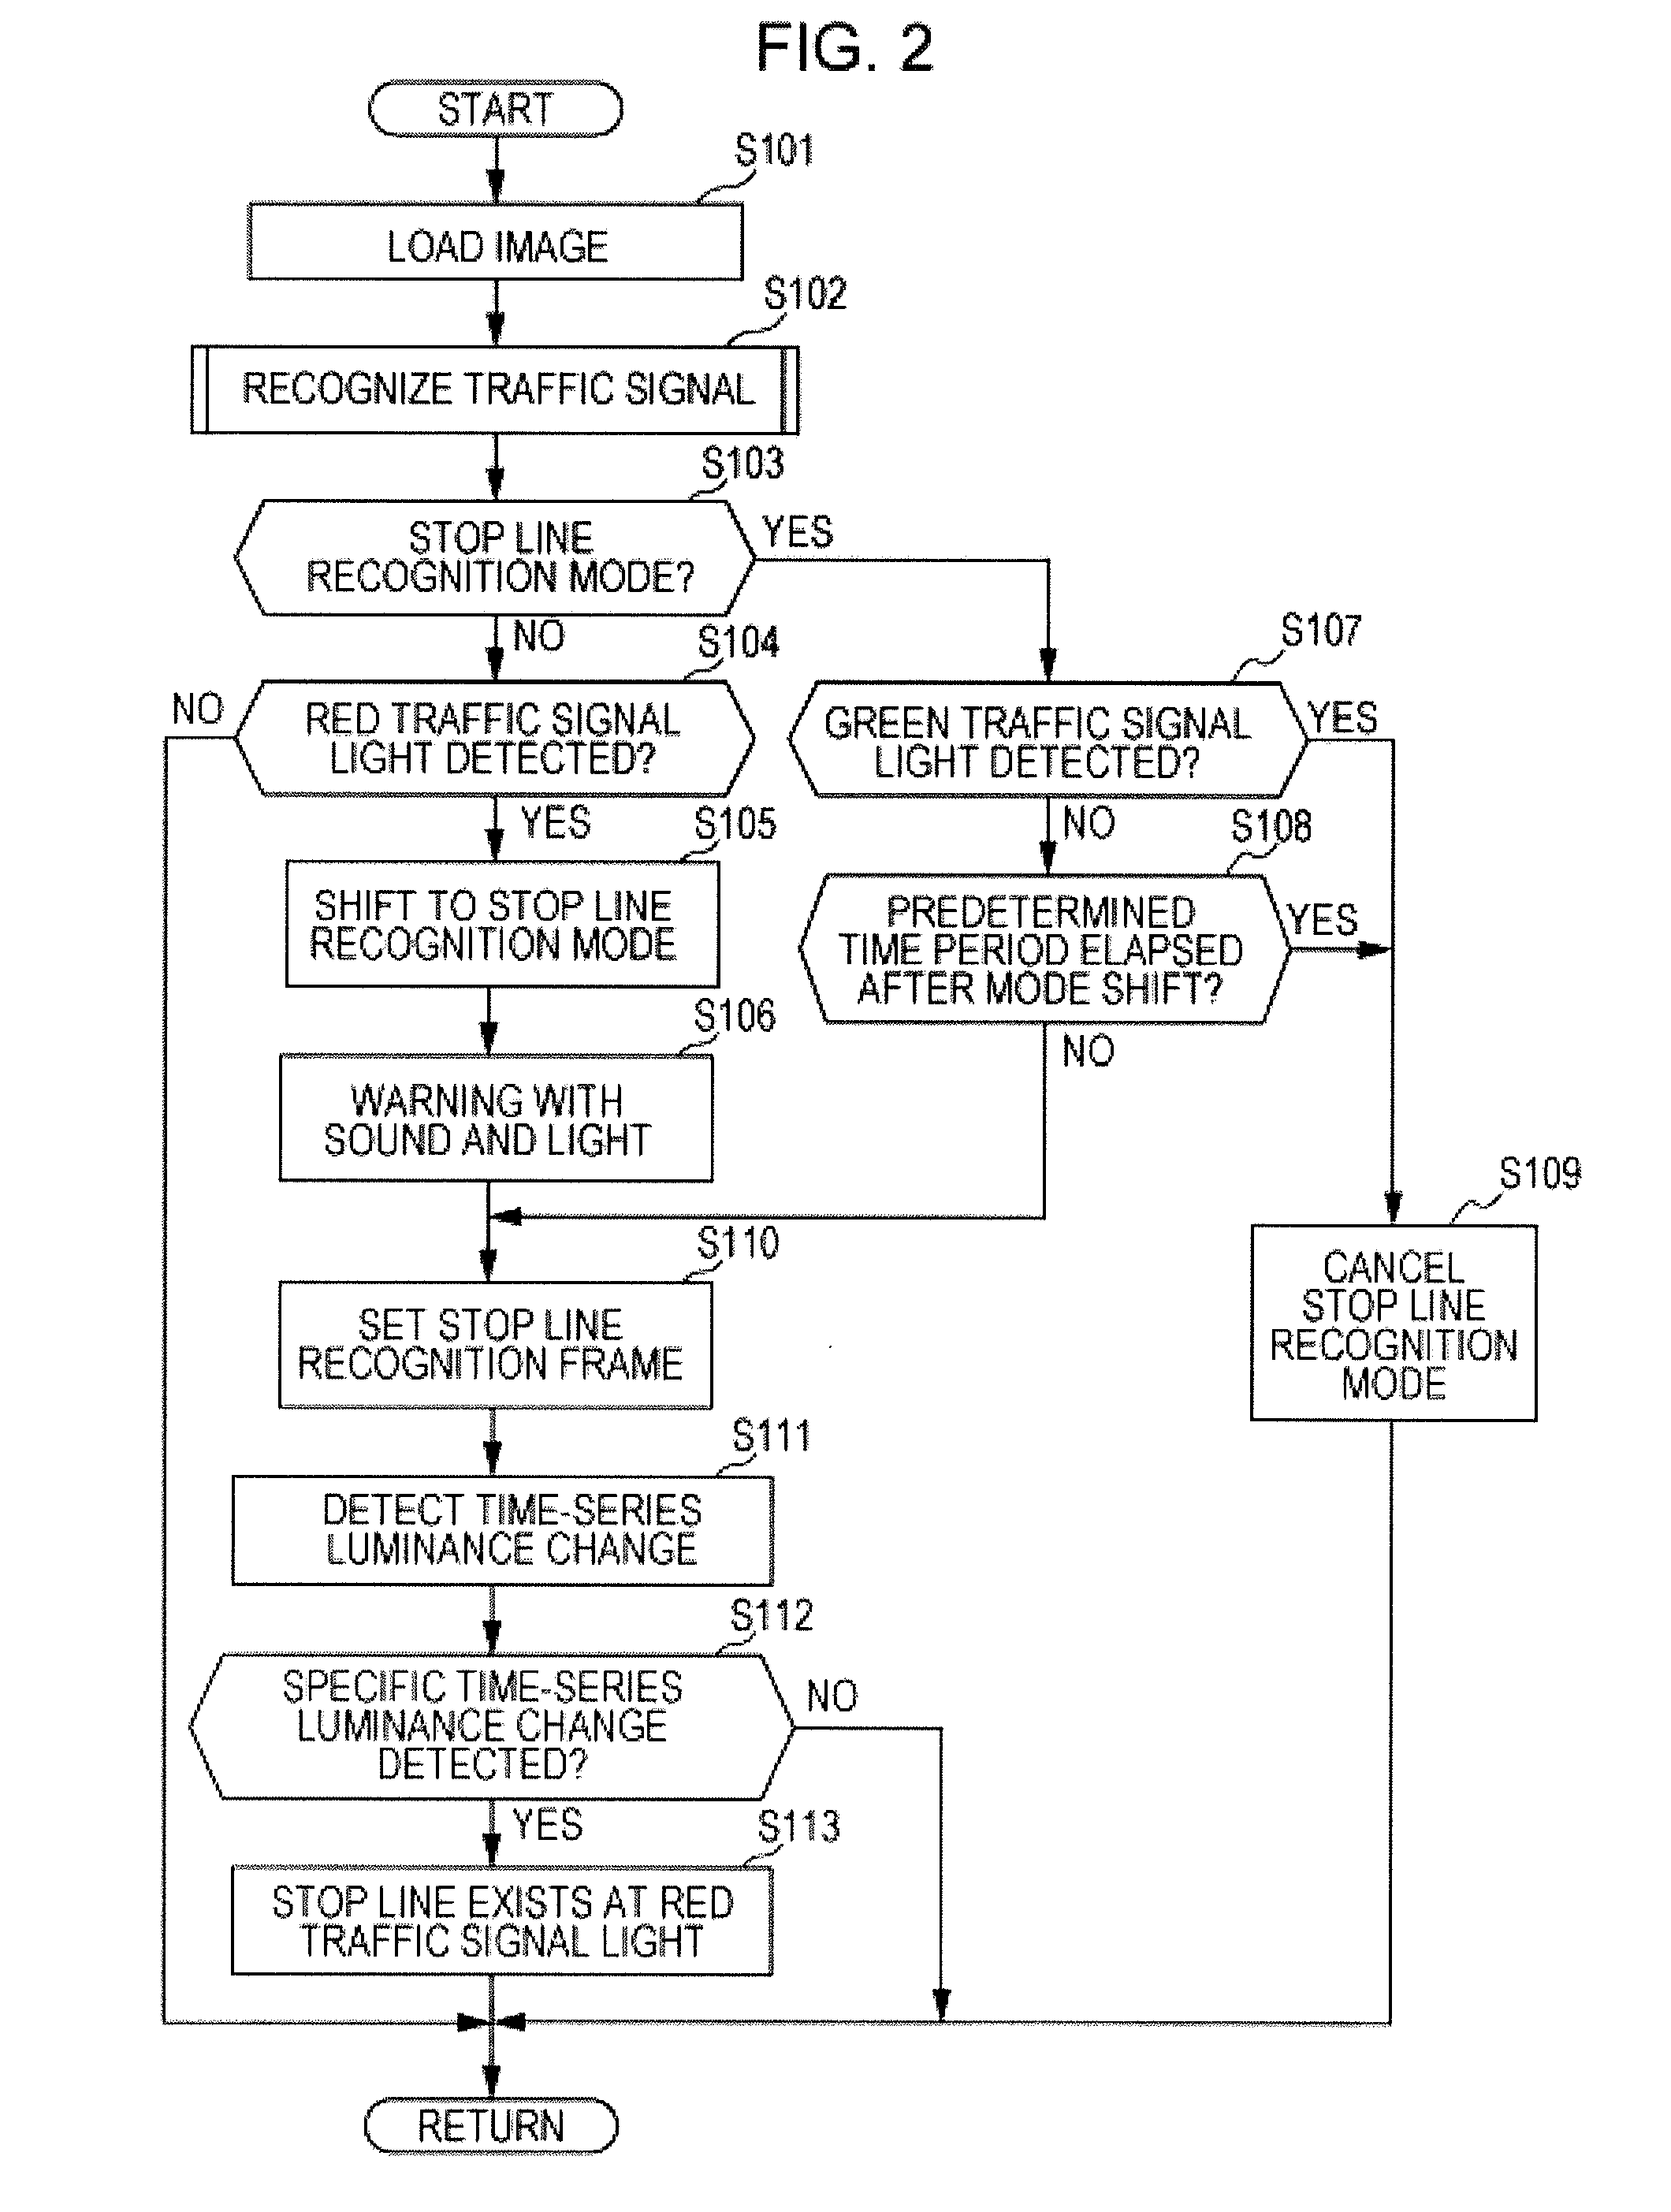 Stop line recognition device